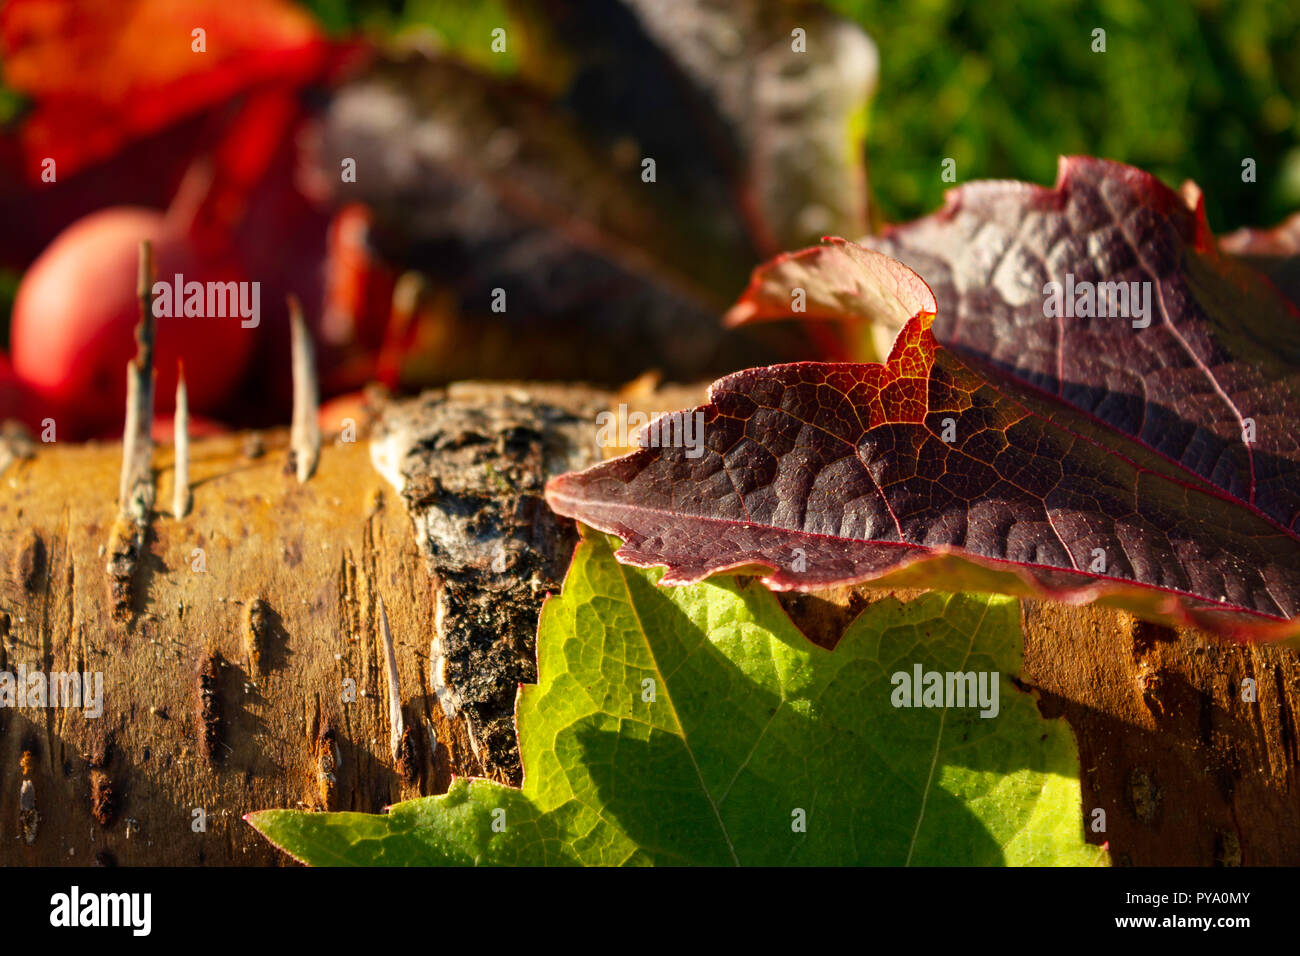 Autumnal still life image of a green and red maple leaves sitting on a wooden log. Stock Photo